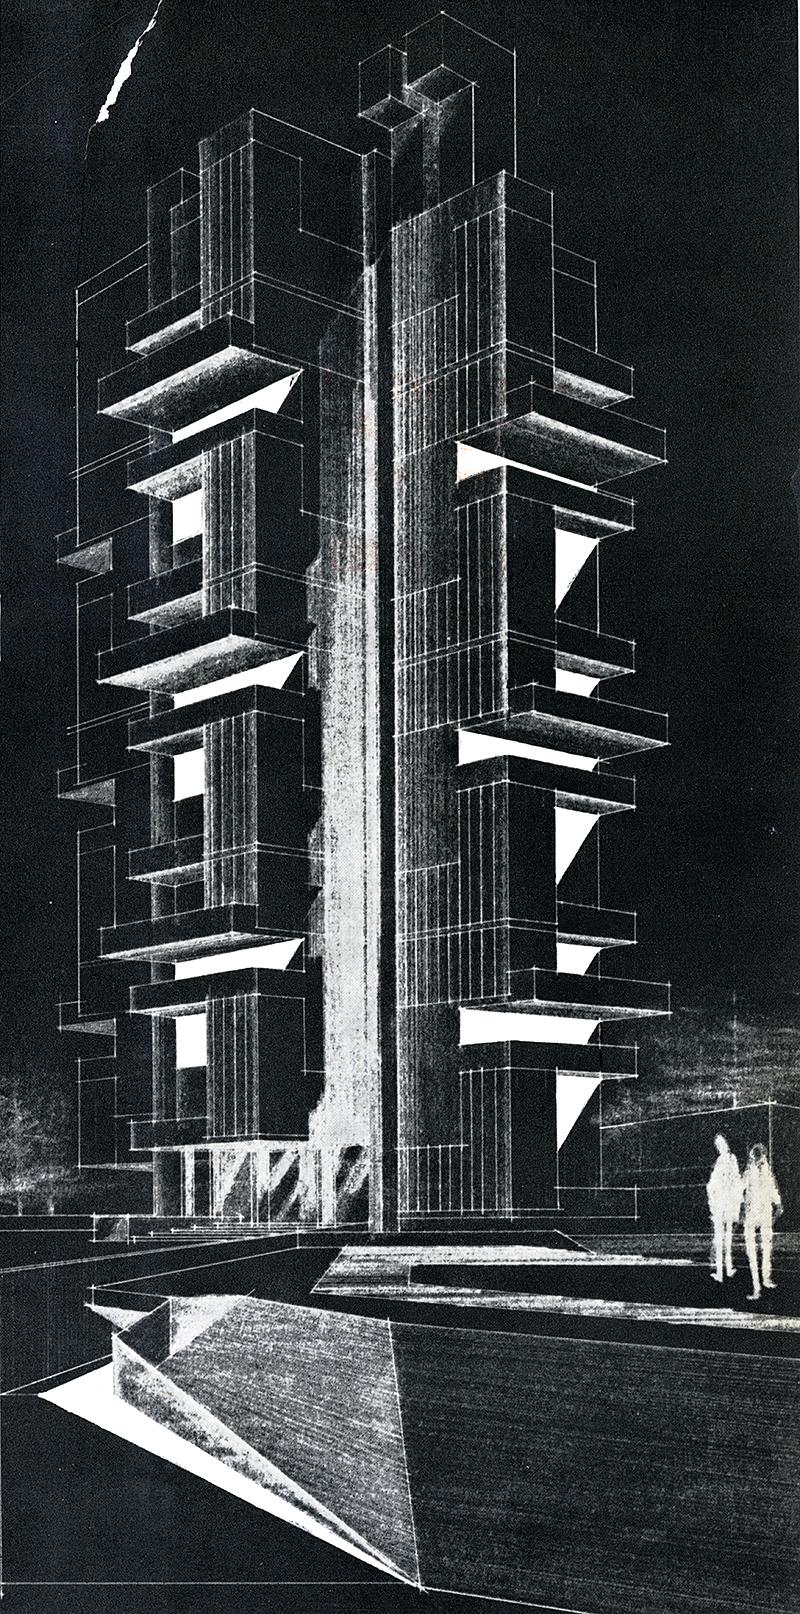 Gollins Melvin and Ward. Architectural Review v.133 n.791 Jan 1963, cover